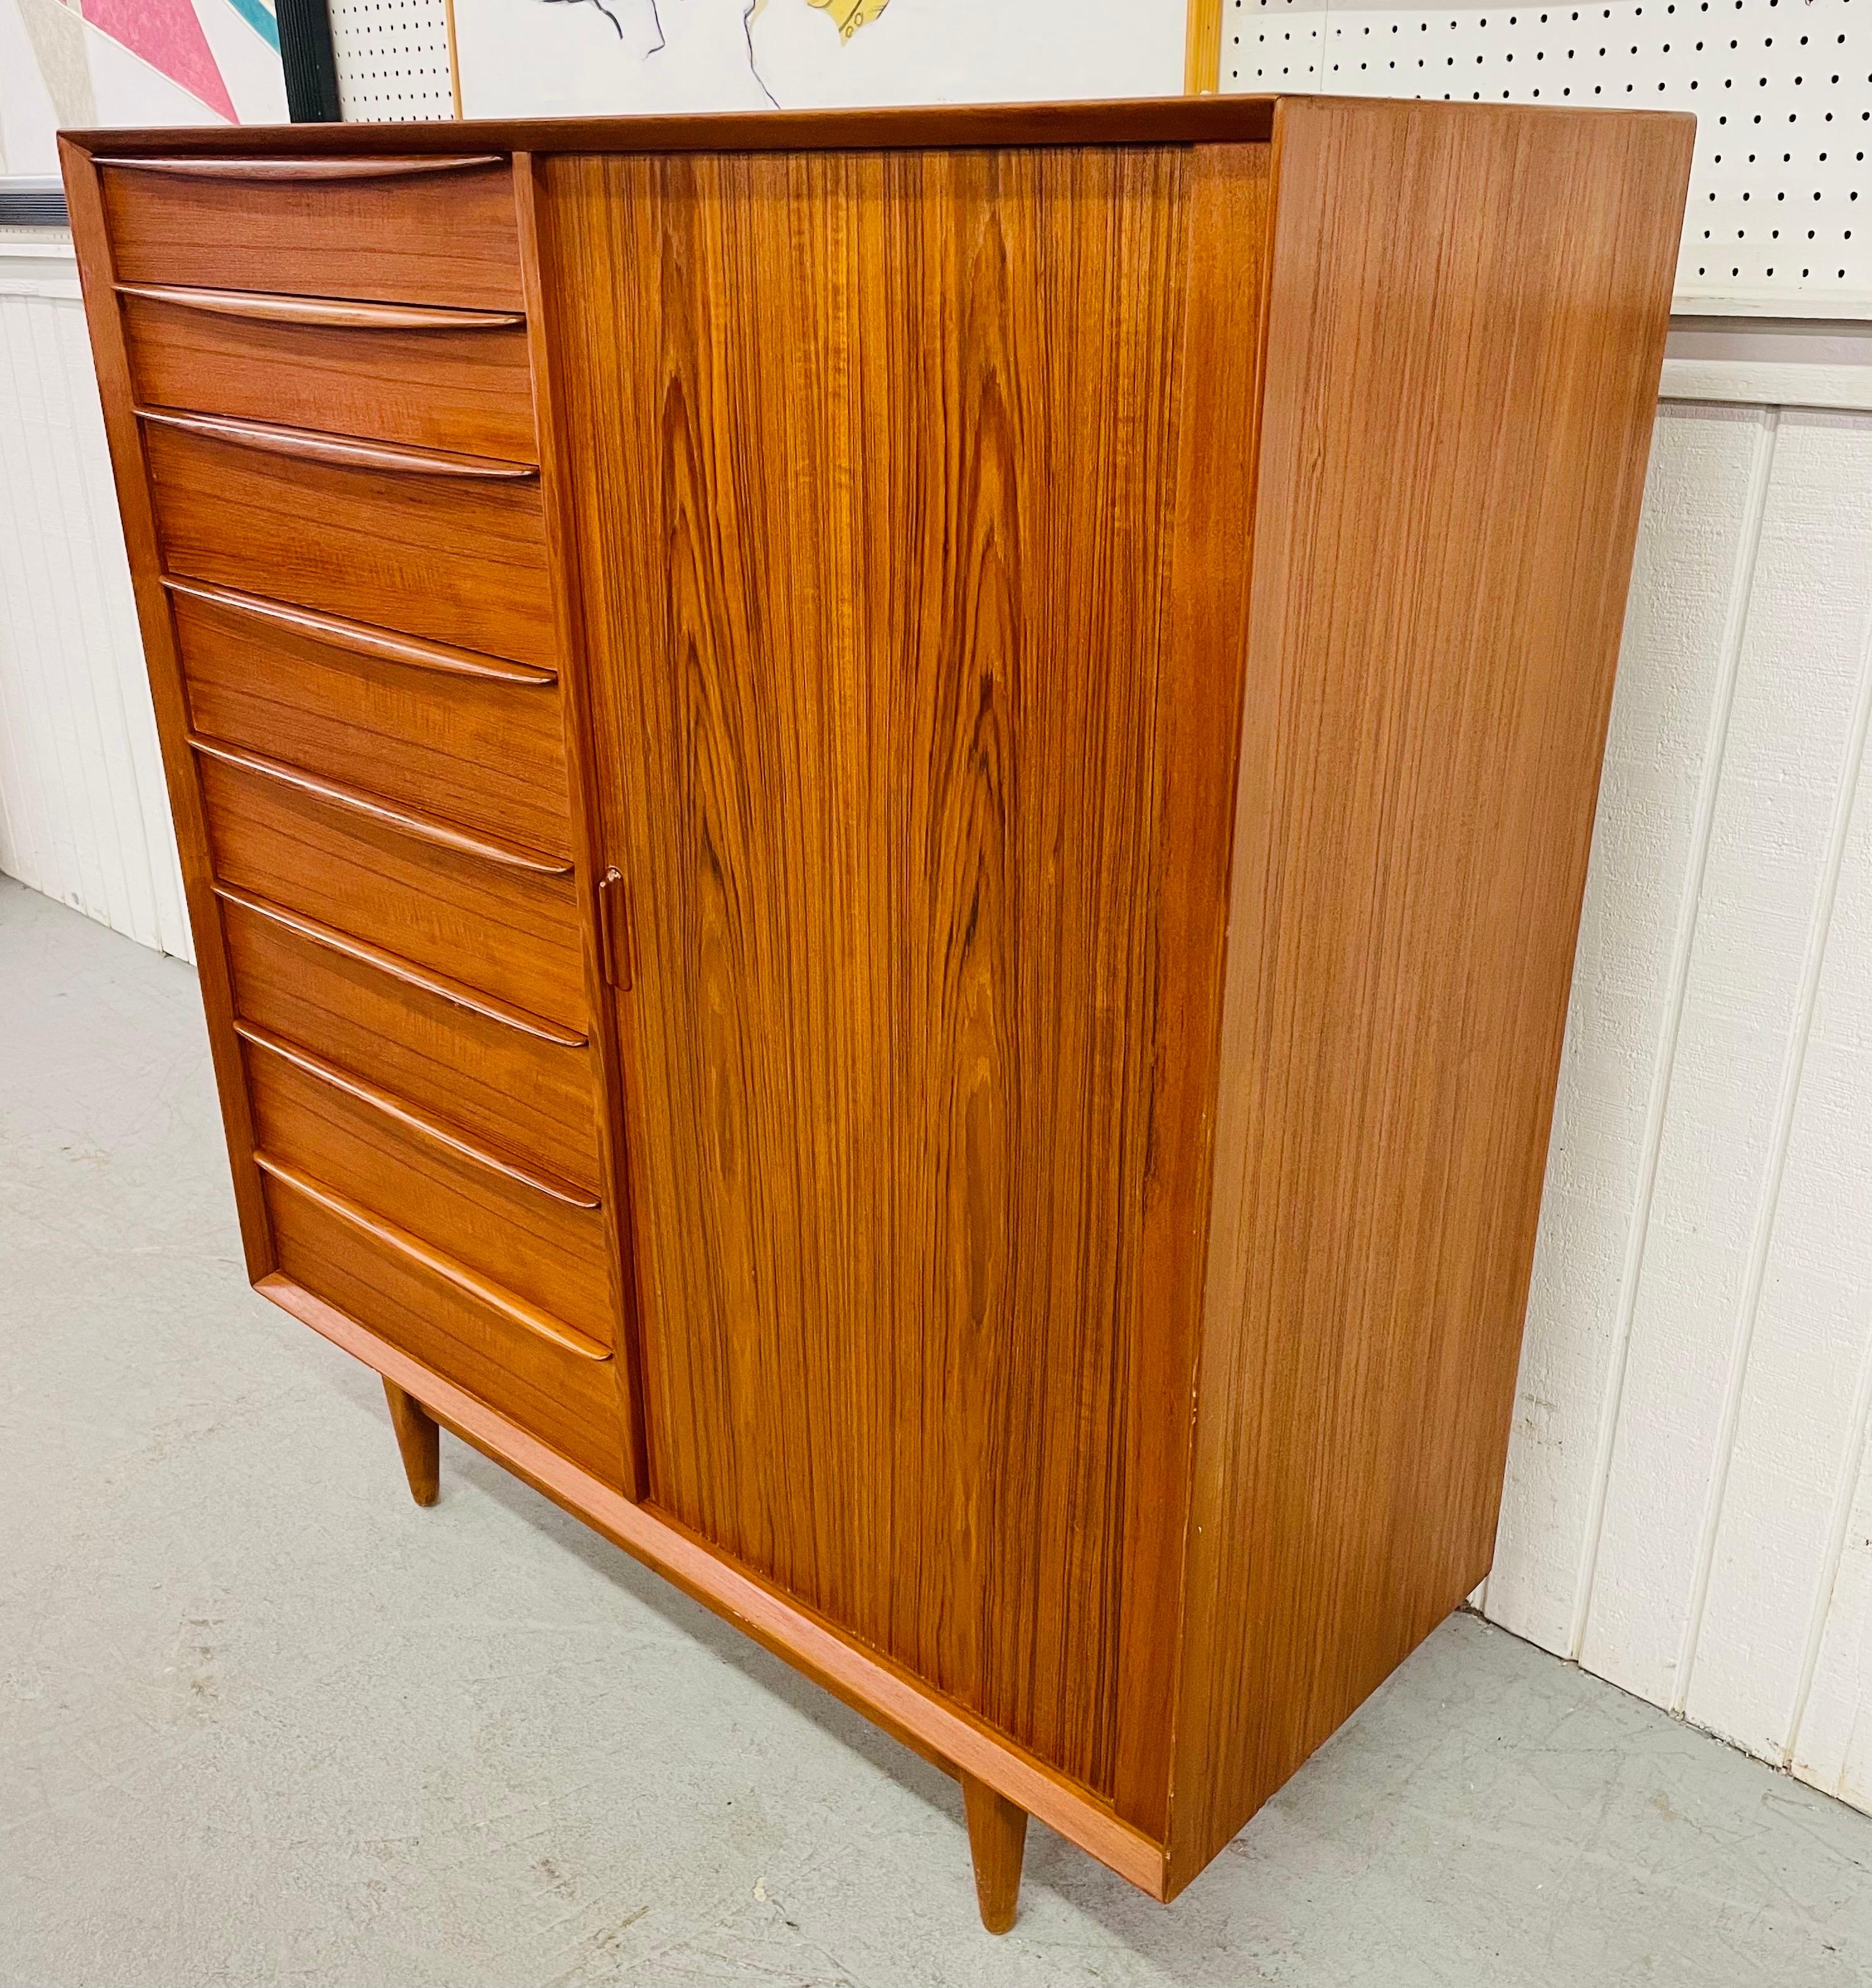 This listing is for an exceptional Mid-Century Danish Modern Falster Teak Tambour High Chest. Featuring eight drawers on the left, a tambour sliding door on the right that opens up to nine hidden drawers, and a beautiful teak finish.